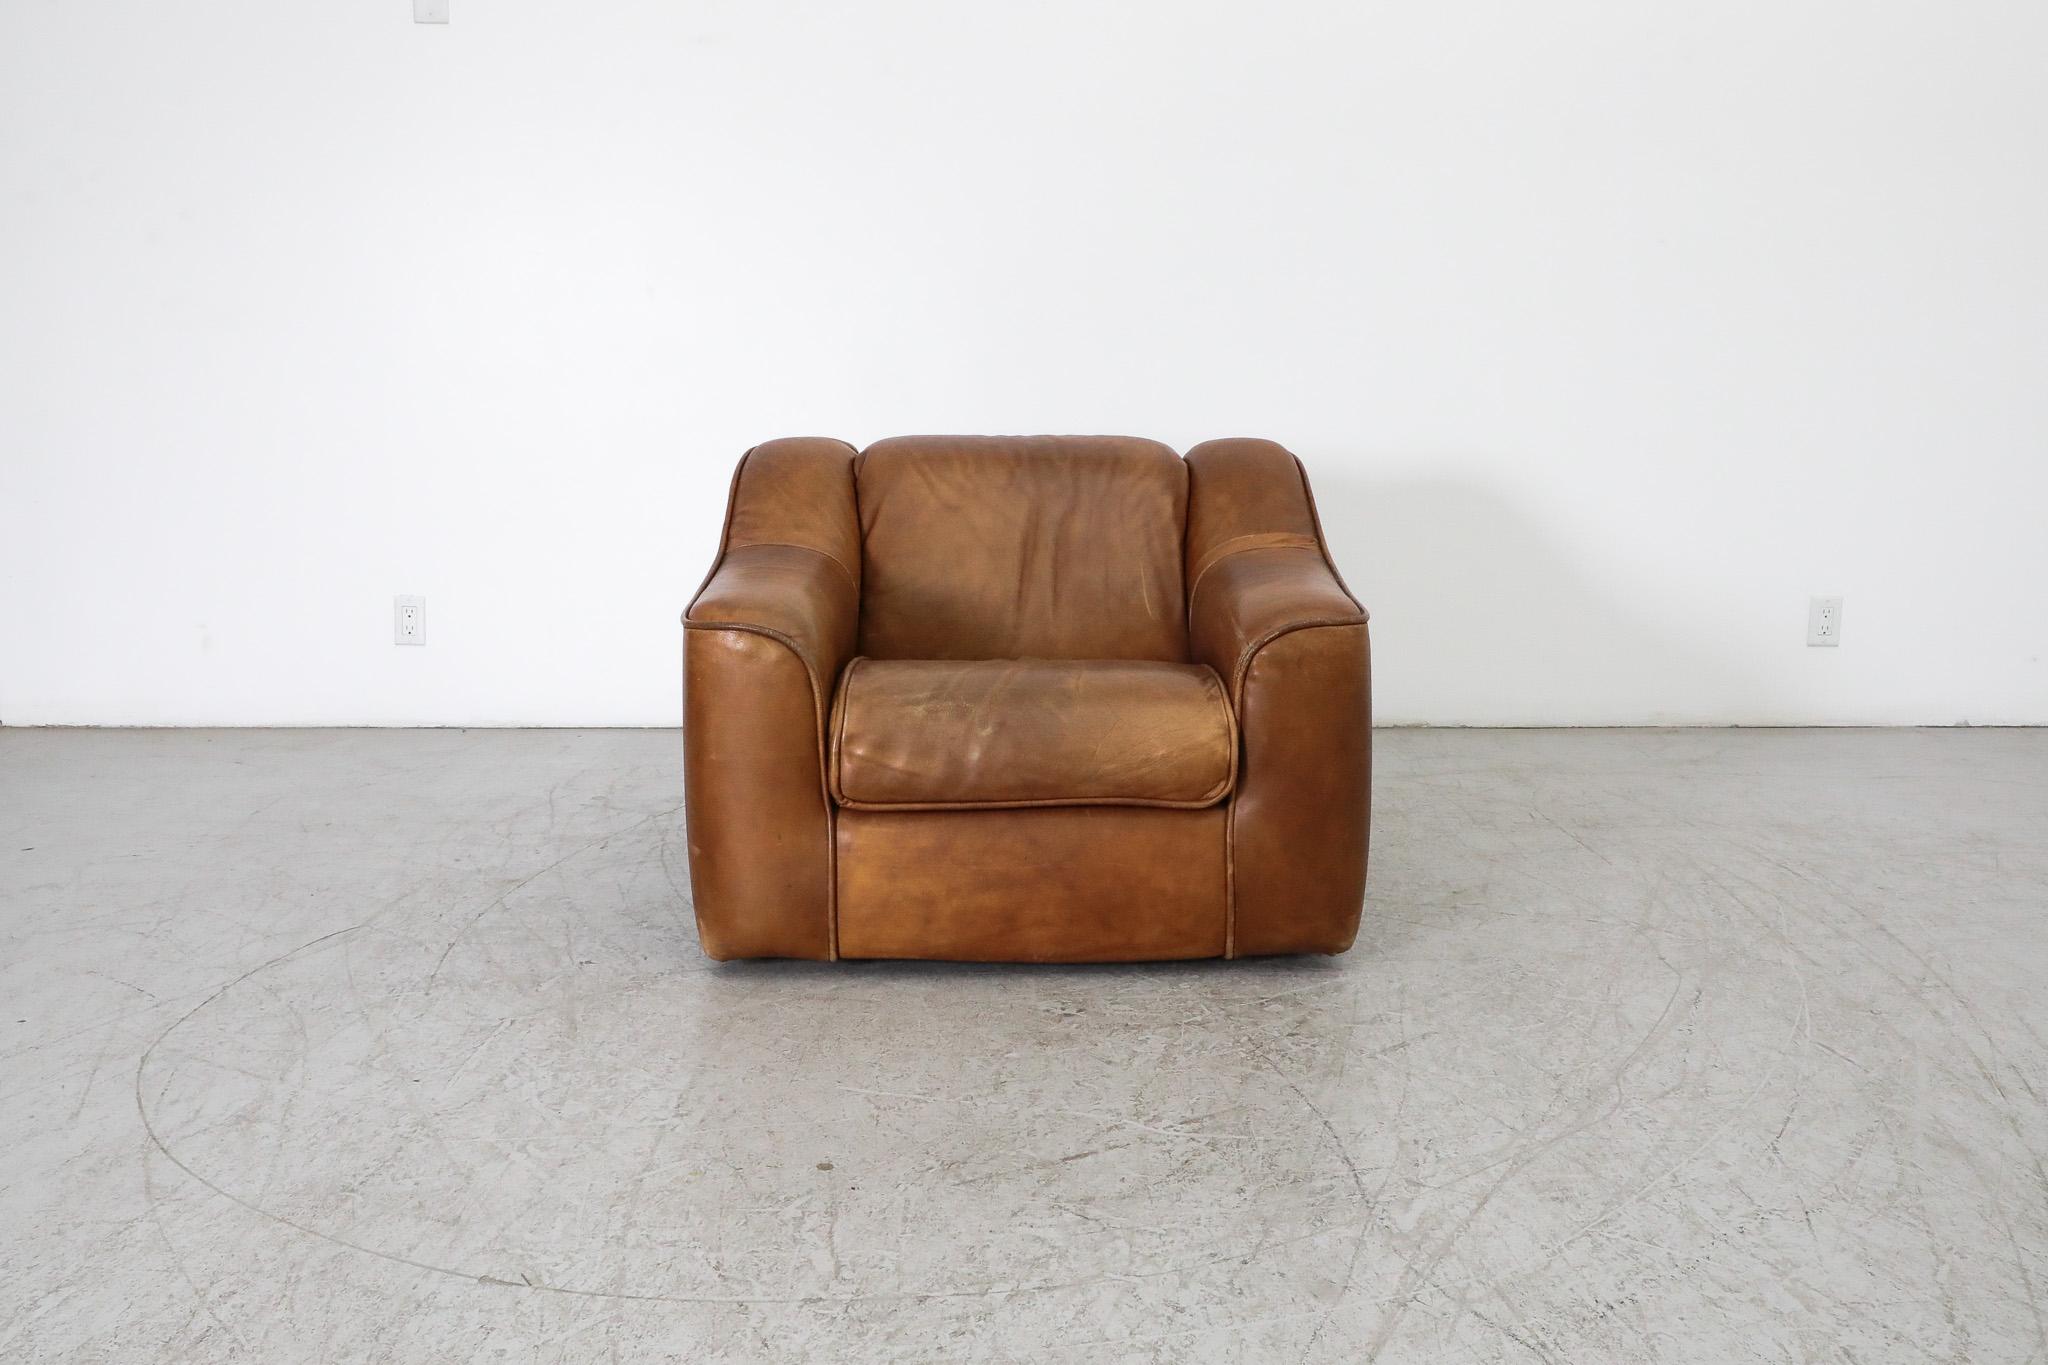 Incredible, Mid-Century, De Sede style, cognac leather lounge chair. Beautiful design with thick leather upholstery and comfortable, high arm rests. In original condition with complimentary visible patina and some wear consistent with age and